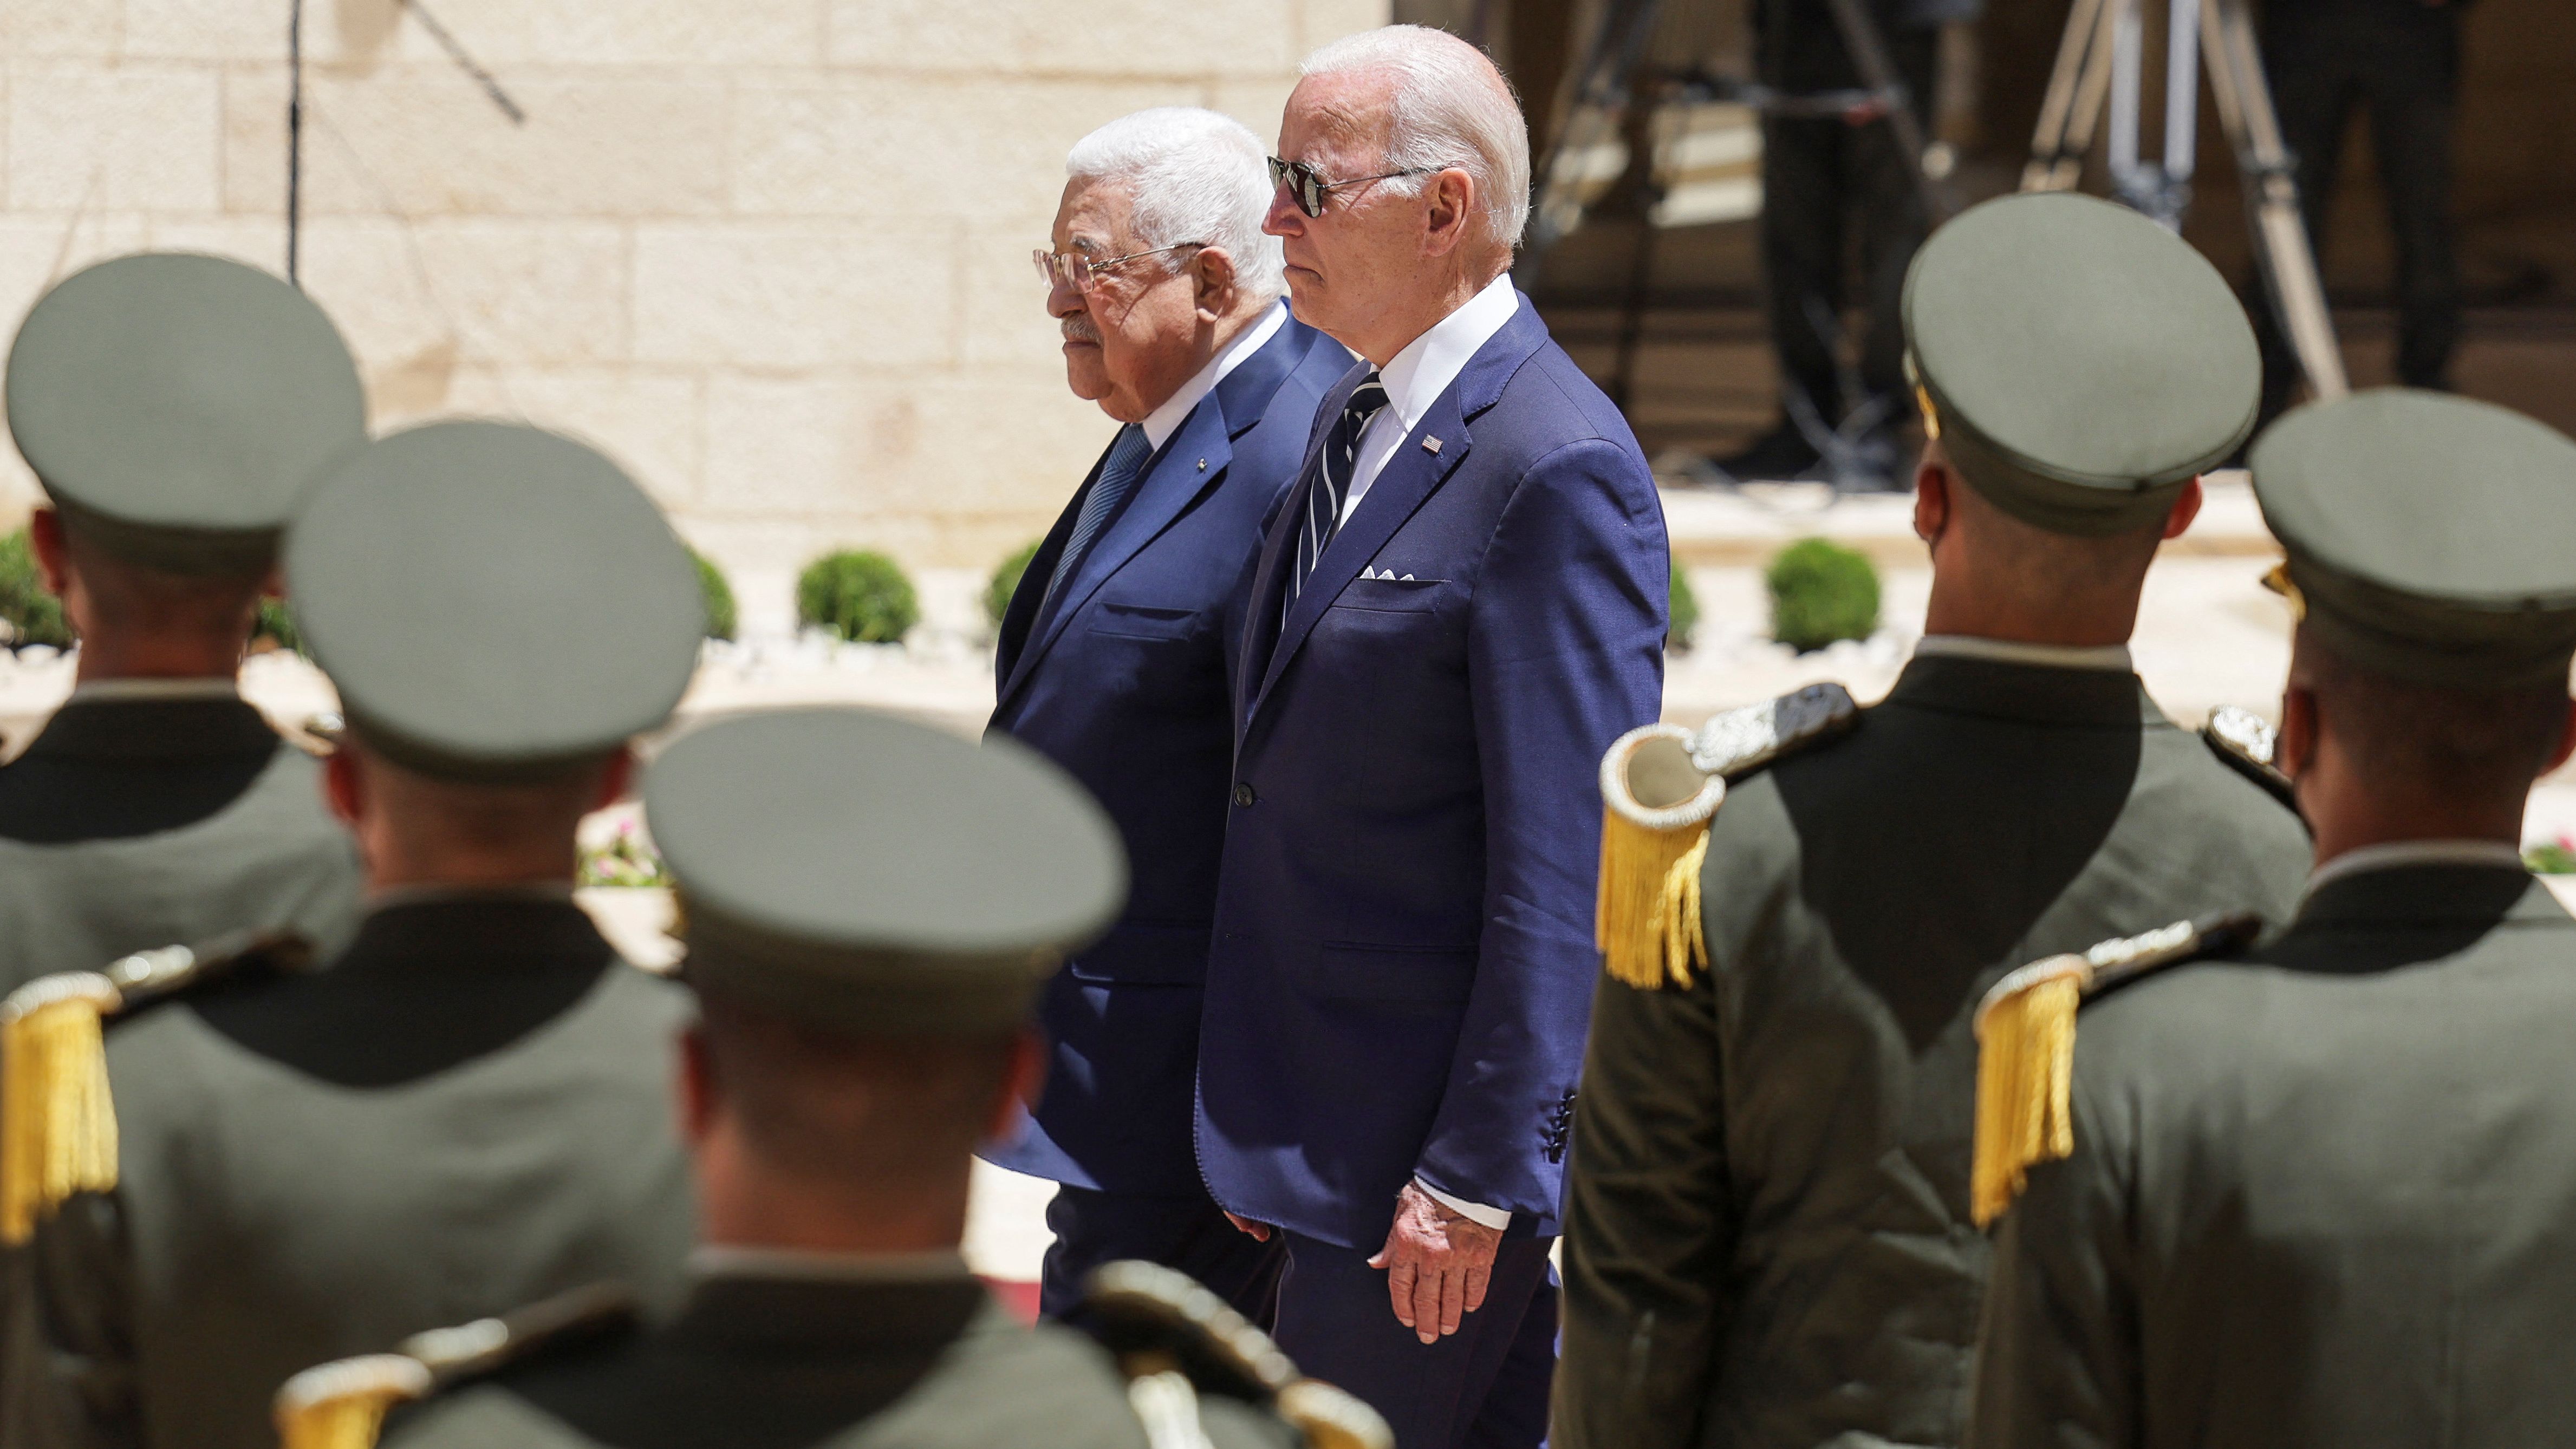 Biden and Palestinian President Mahmoud Abbas walk together Friday at the Presidential Compound in the West Bank.